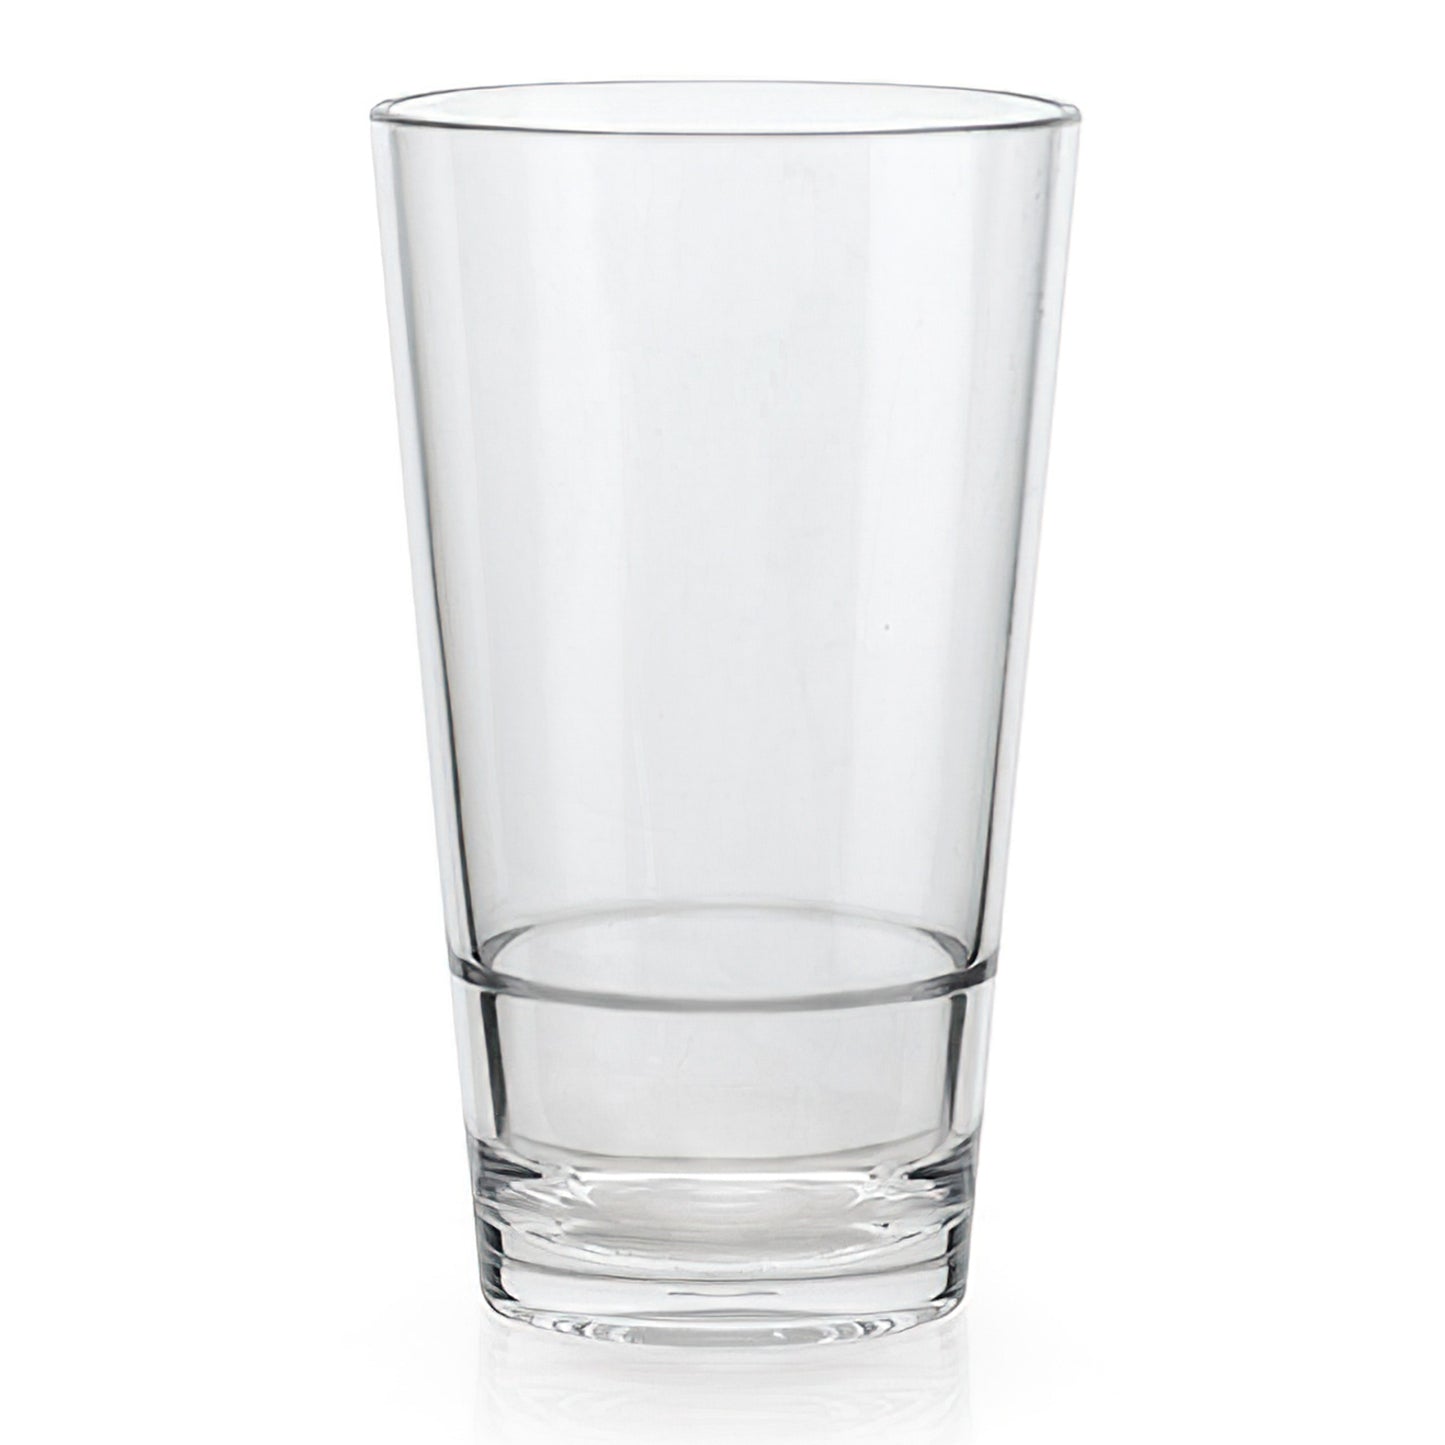 20 oz. (21 oz. rim-full), 3.4" Stackable Glass, 6.6" Tall (12 Pack)